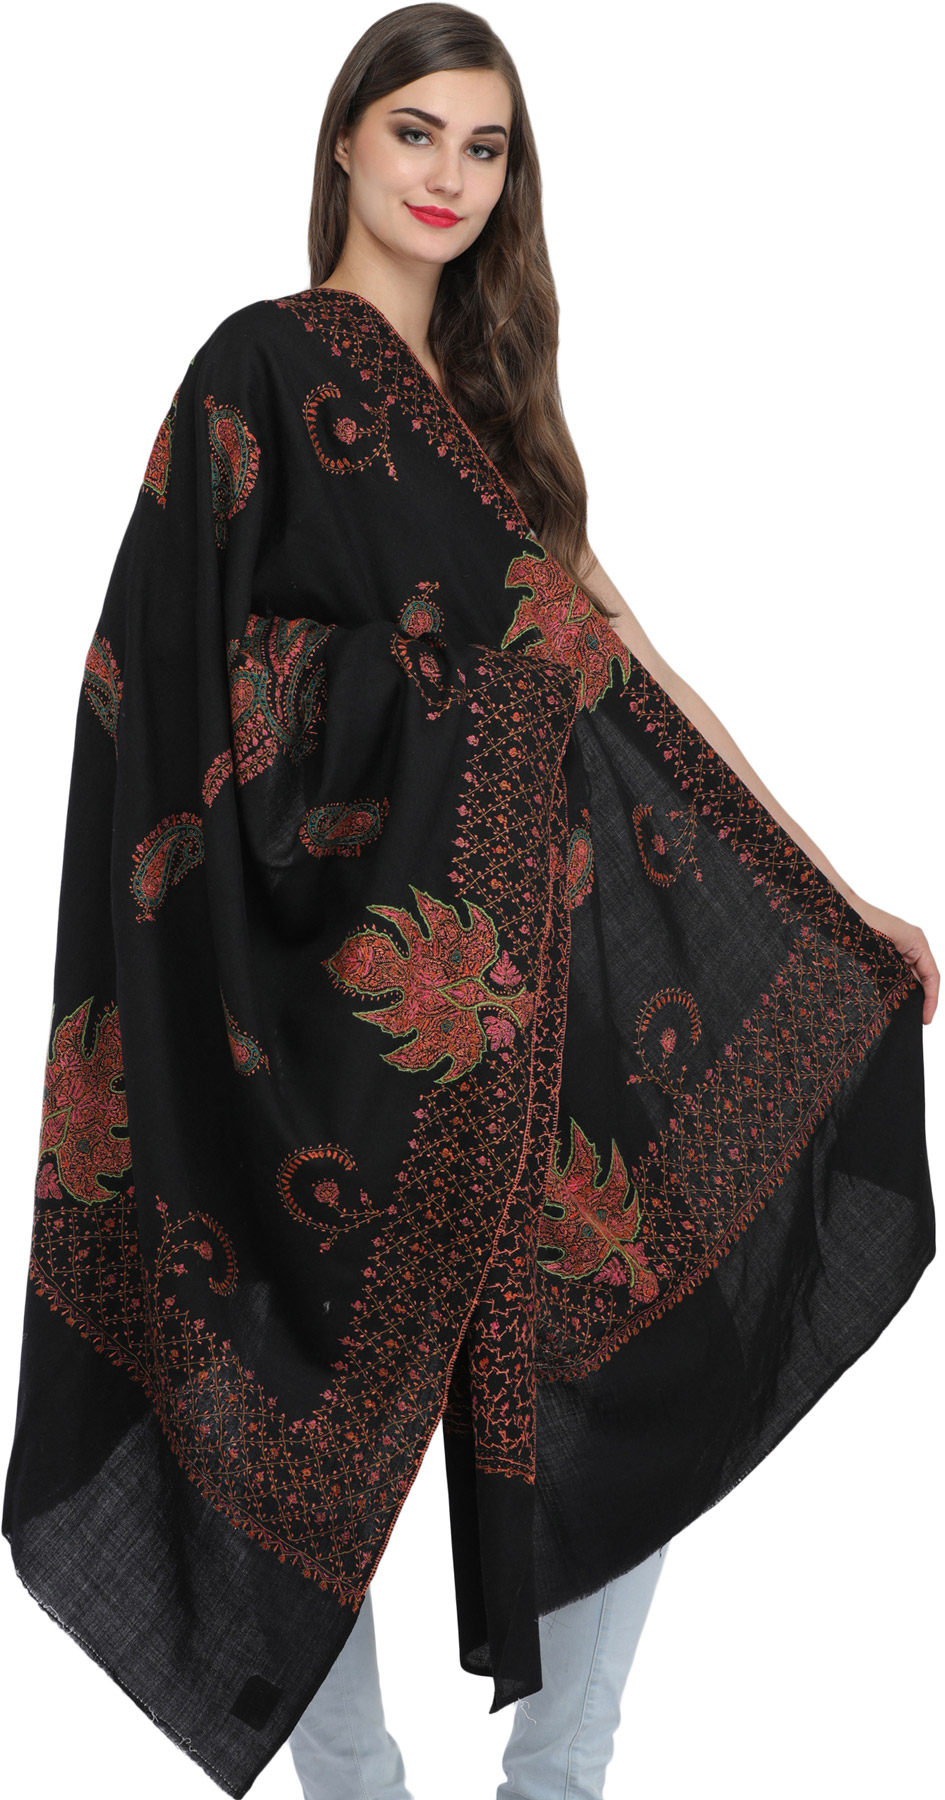 Jet-Black Tusha Shawl from Kashmir with Sozni Hand-Embroidered Chinar ...